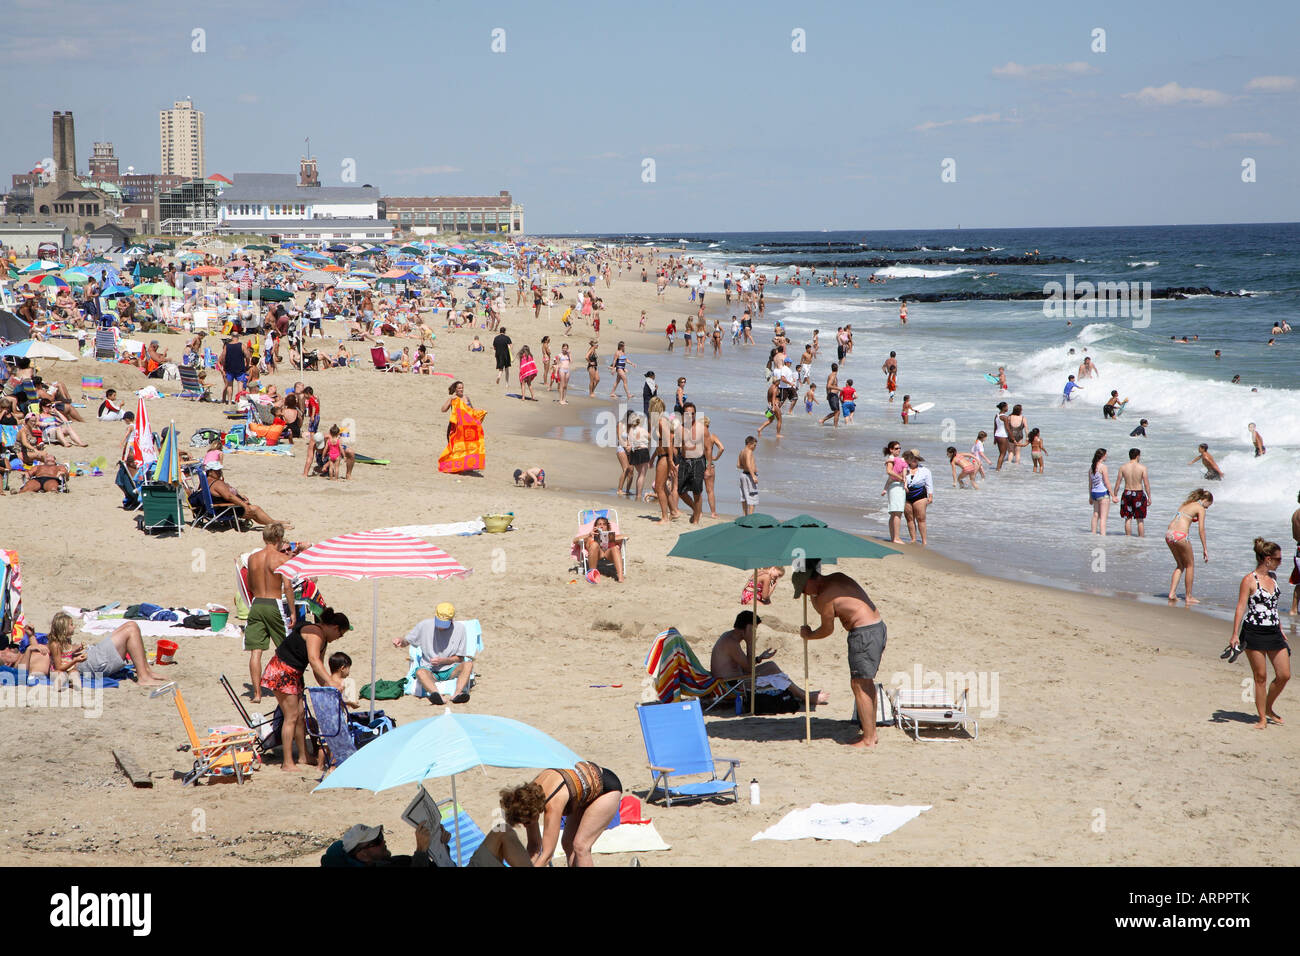 Along the surfline of a jersey shore beach with people walking, standing and splashing in the shallows. Stock Photo